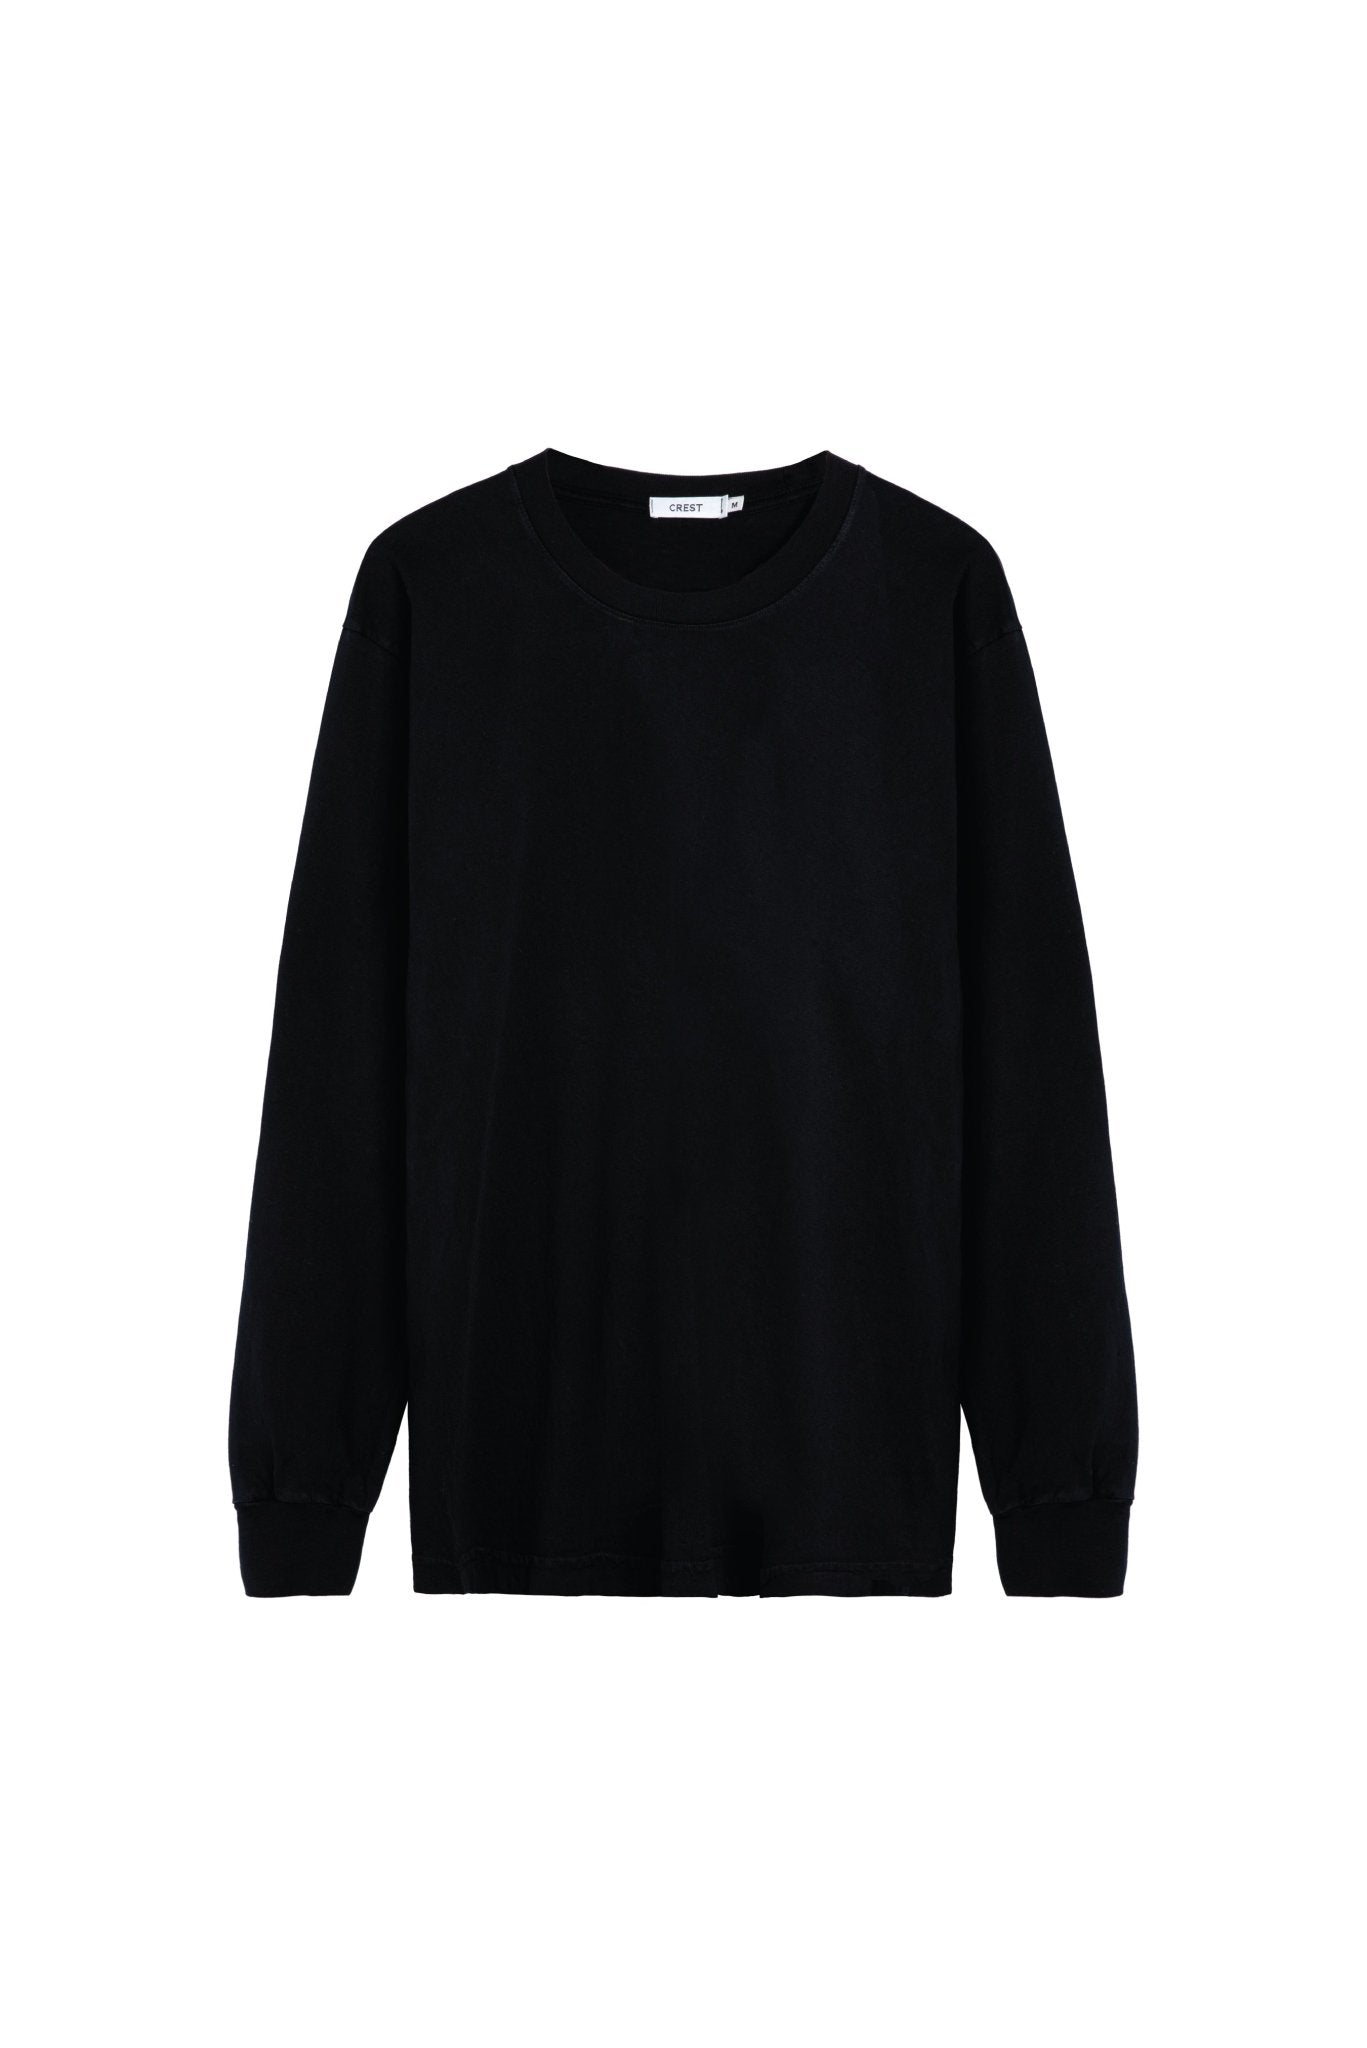 black long-sleeve T-shirt featuring a logo print at the back, made with premium organic cotton for ultimate comfort and style